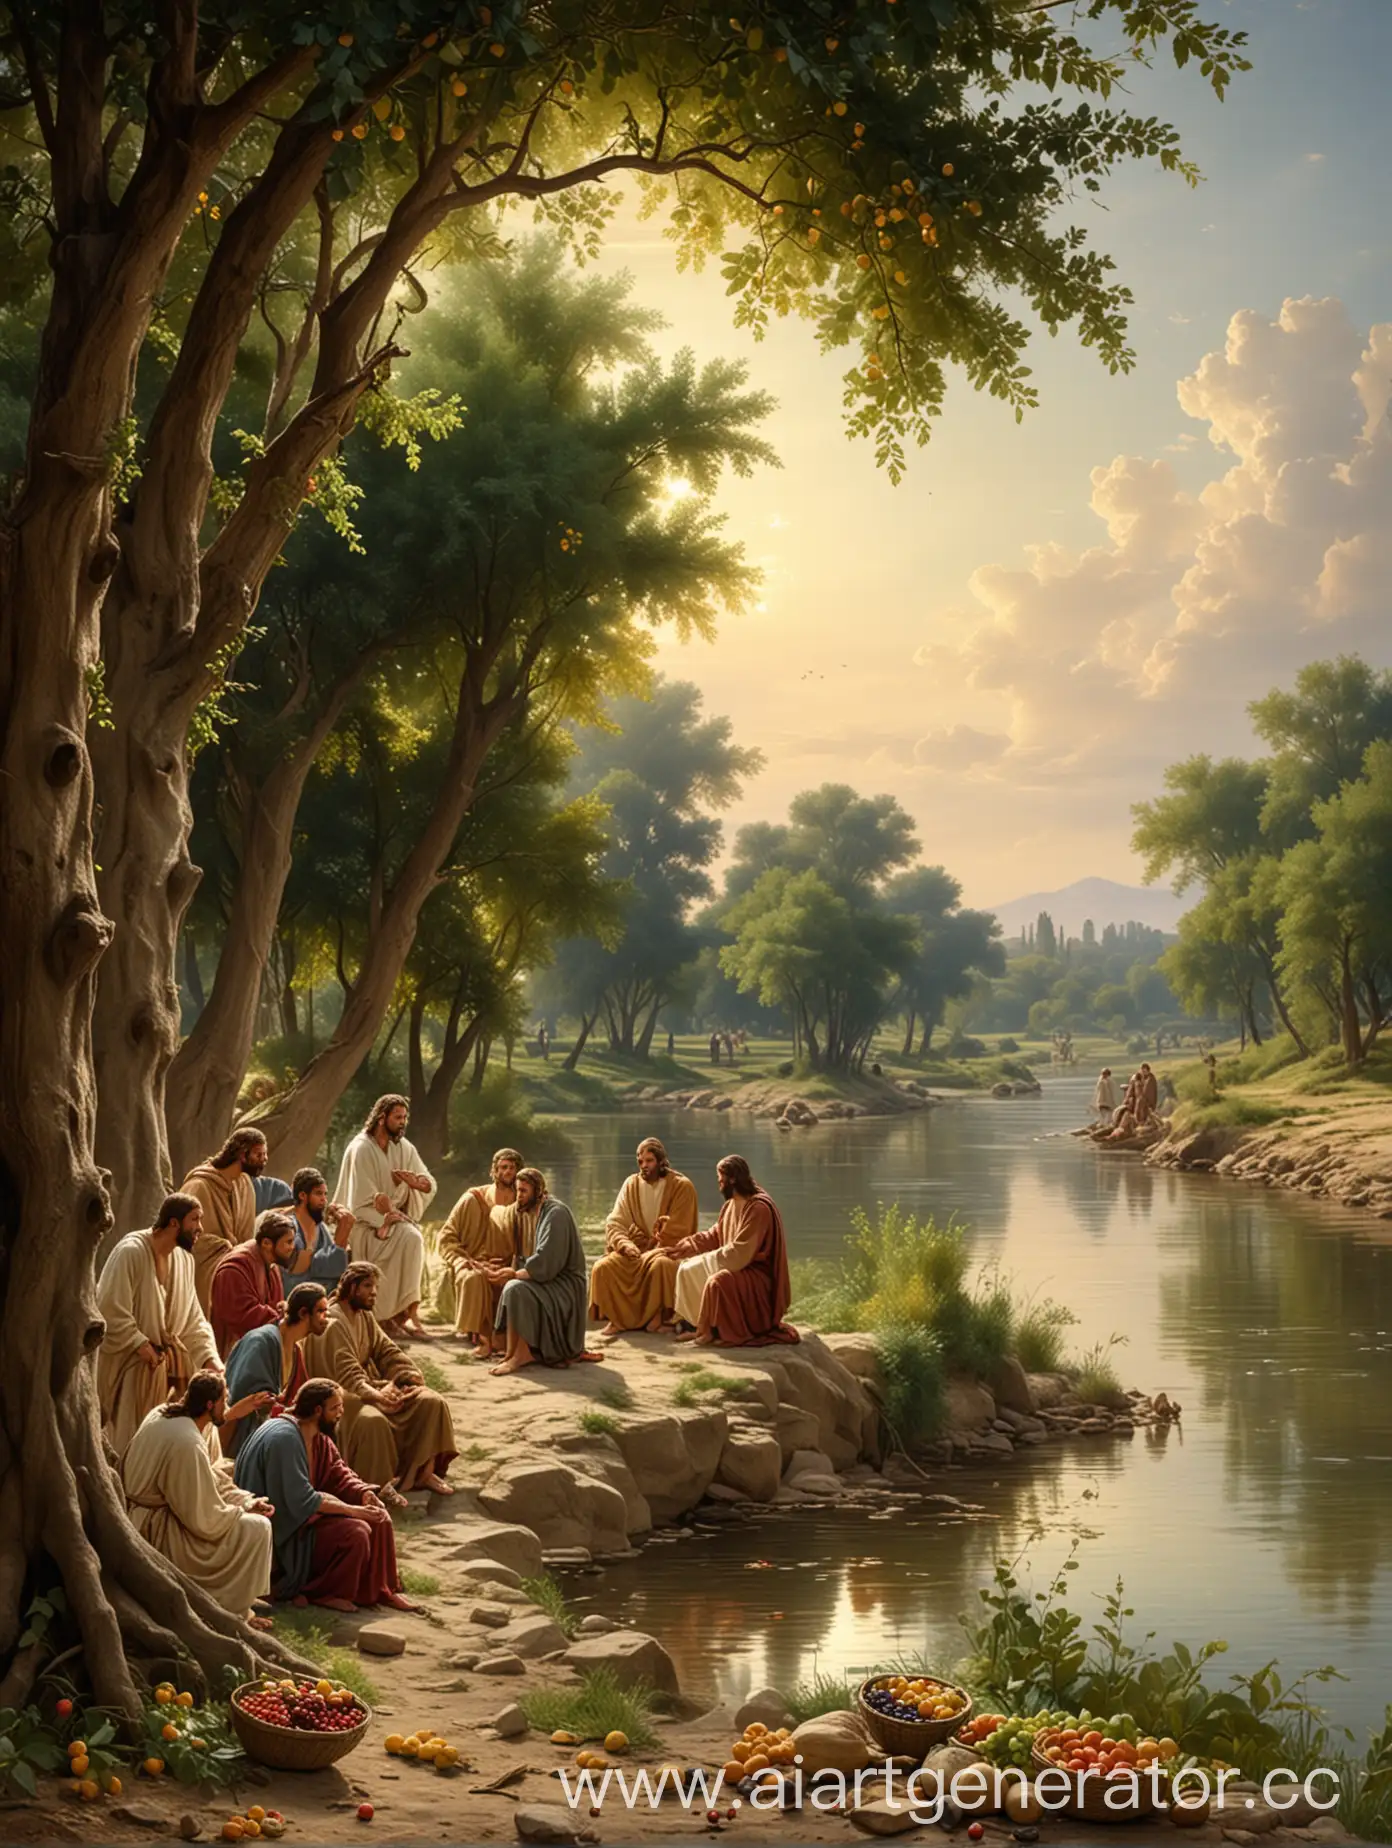 Jesus and the disciples by the river

A scene/trees with many fruits